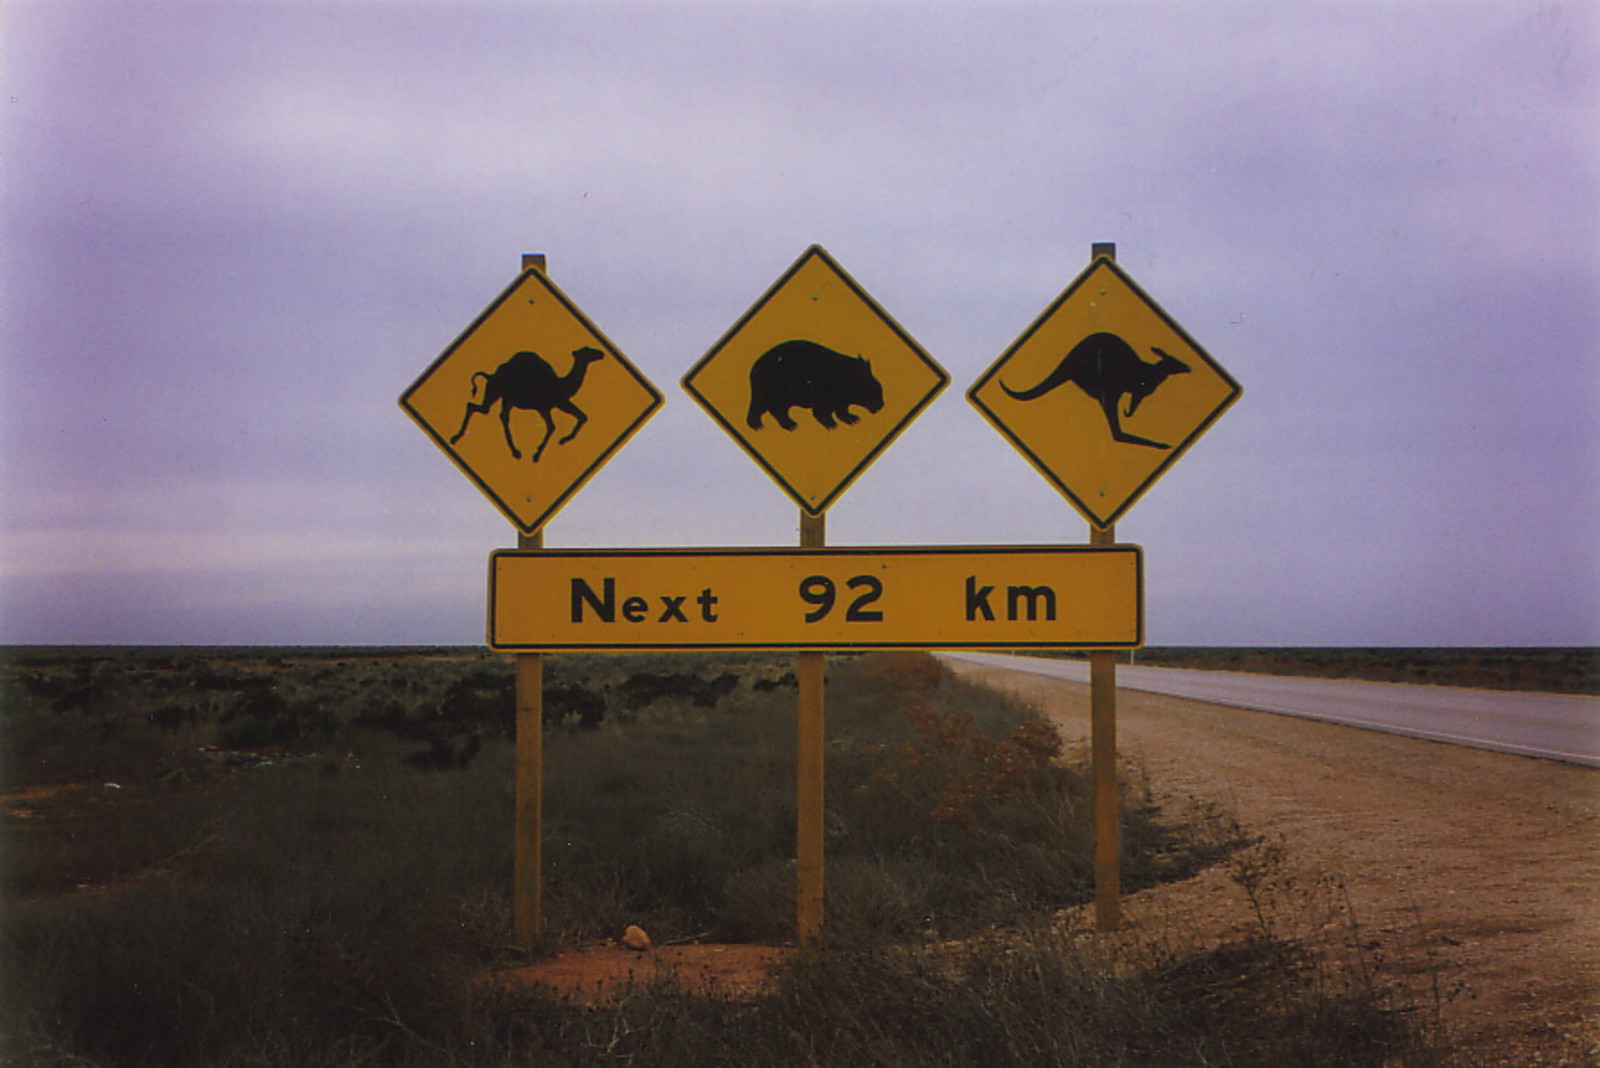 A warning sign for camels, wombats and kangaroos